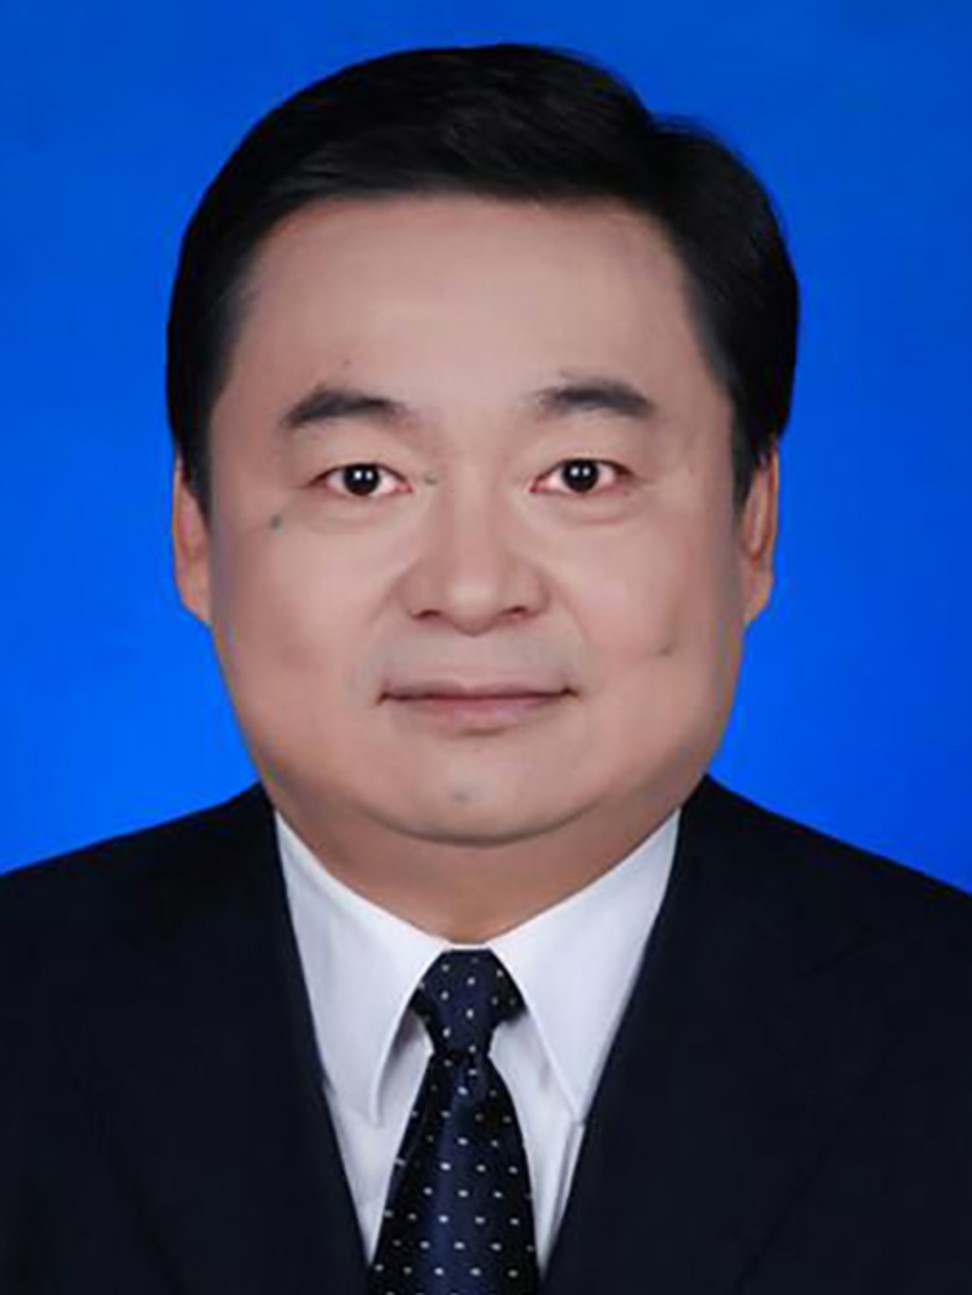 Hao Peng, the current Communist Party chief of the state assets watchdog, will assume the role of chairman at State-owned Assets Supervision and Administration Commission (Sasac). Photo: Handout